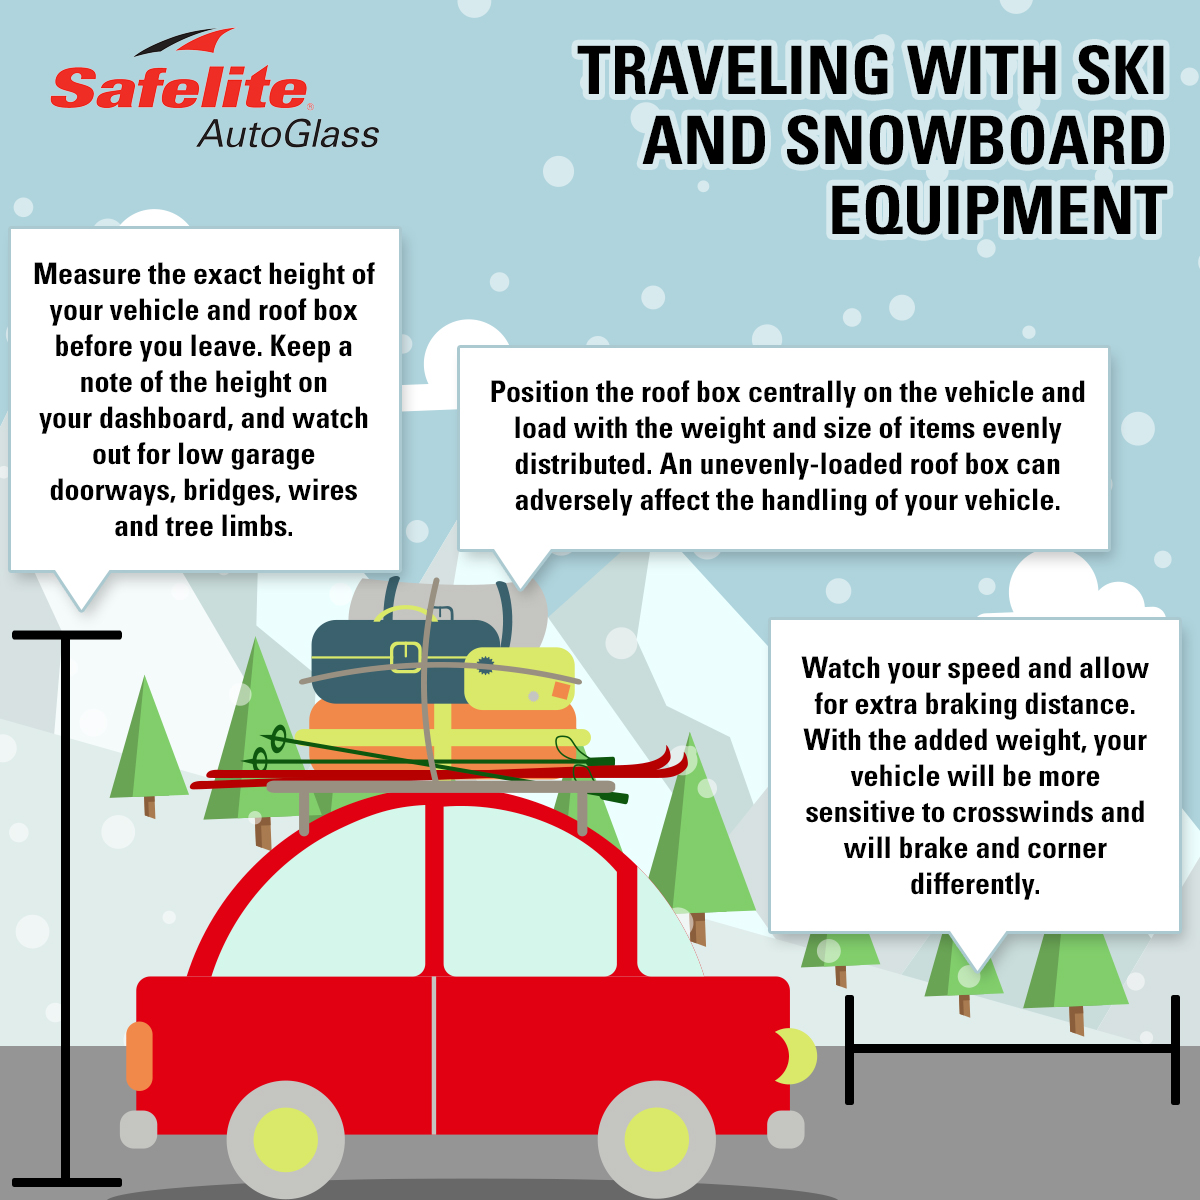 Be careful to follow these tips for a safe ride when transporting skis and snowboards!